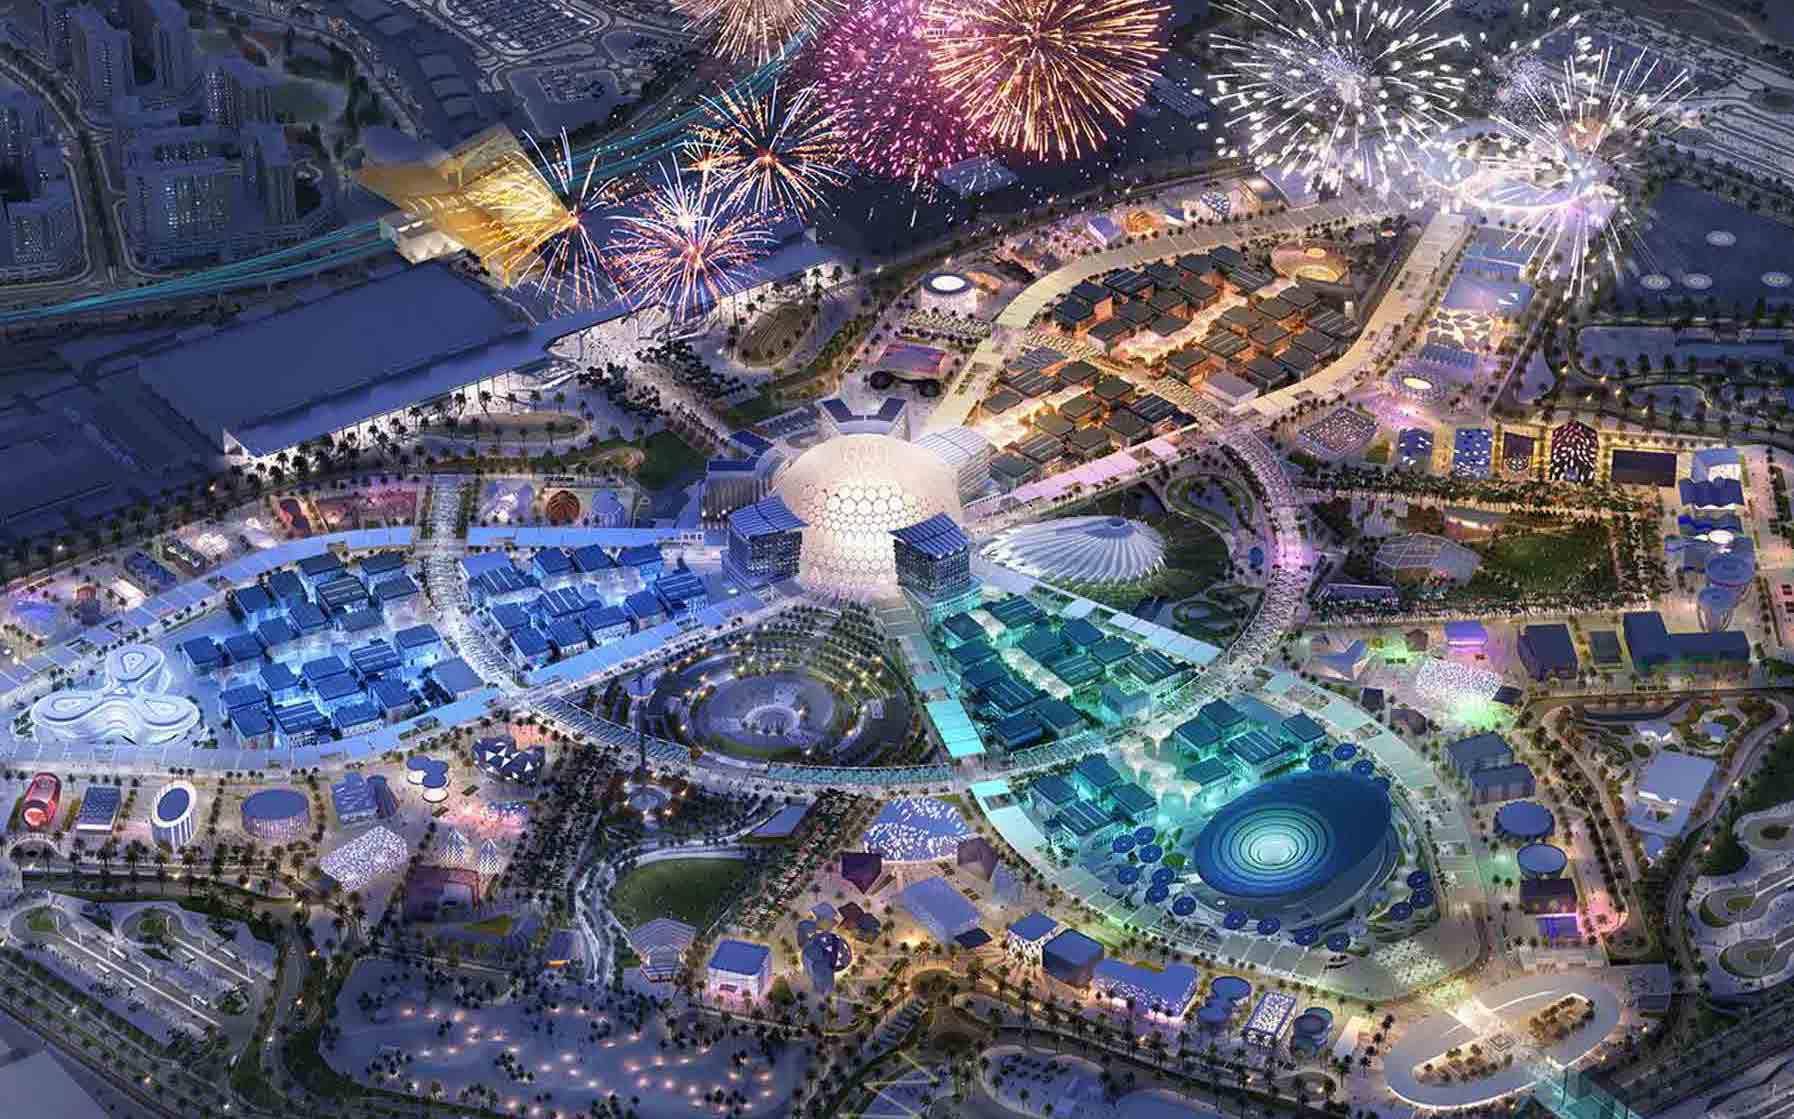 Expo 2020 Dubai Ticket prices, free tickets and discounts announced